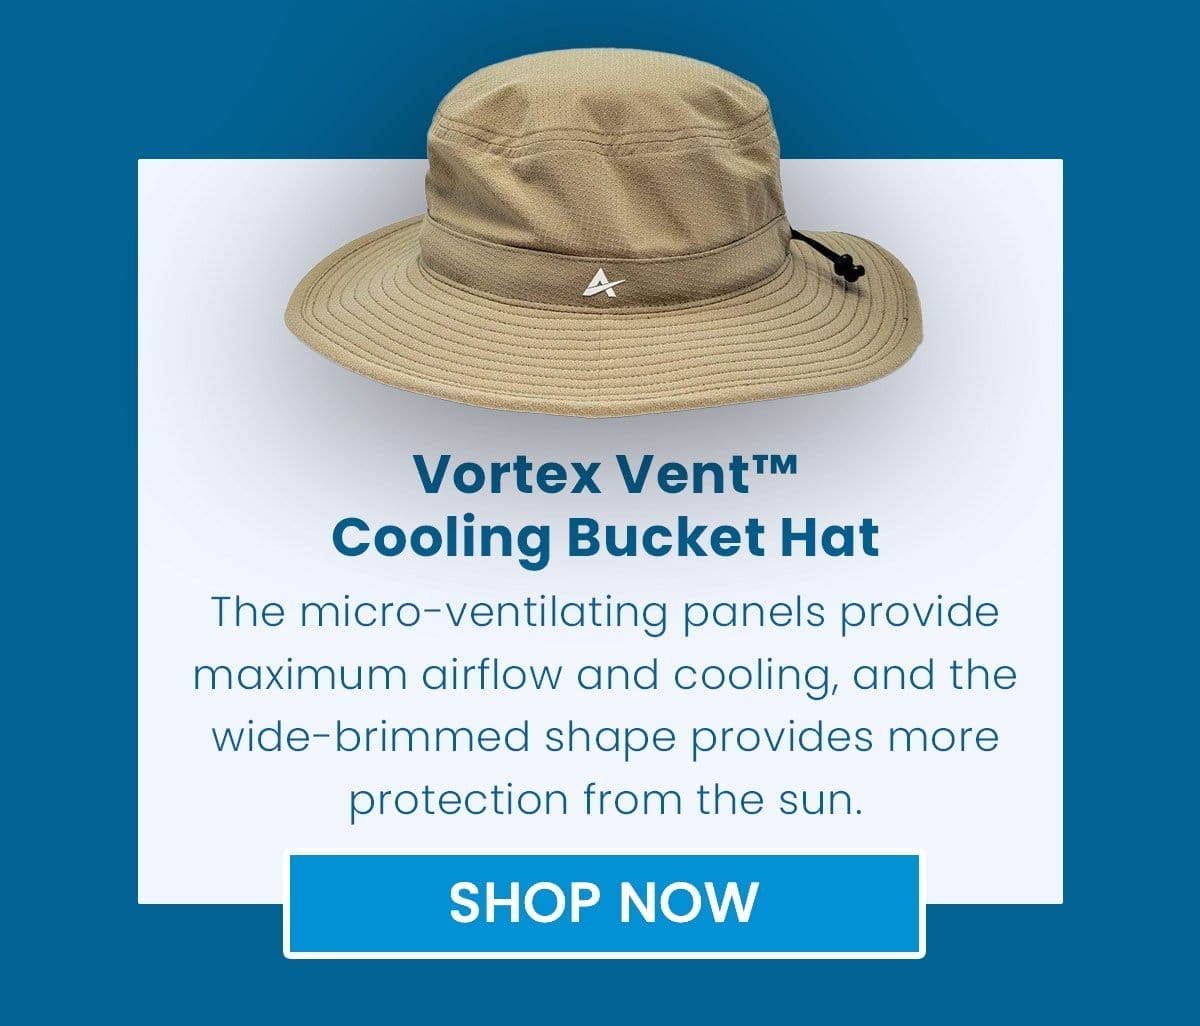 Vortex Vent™ Cooling Bucket Hat The micro-ventilating panels provide maximum airflow and cooling, and the wide-brimmed shape provides more protection from the sun